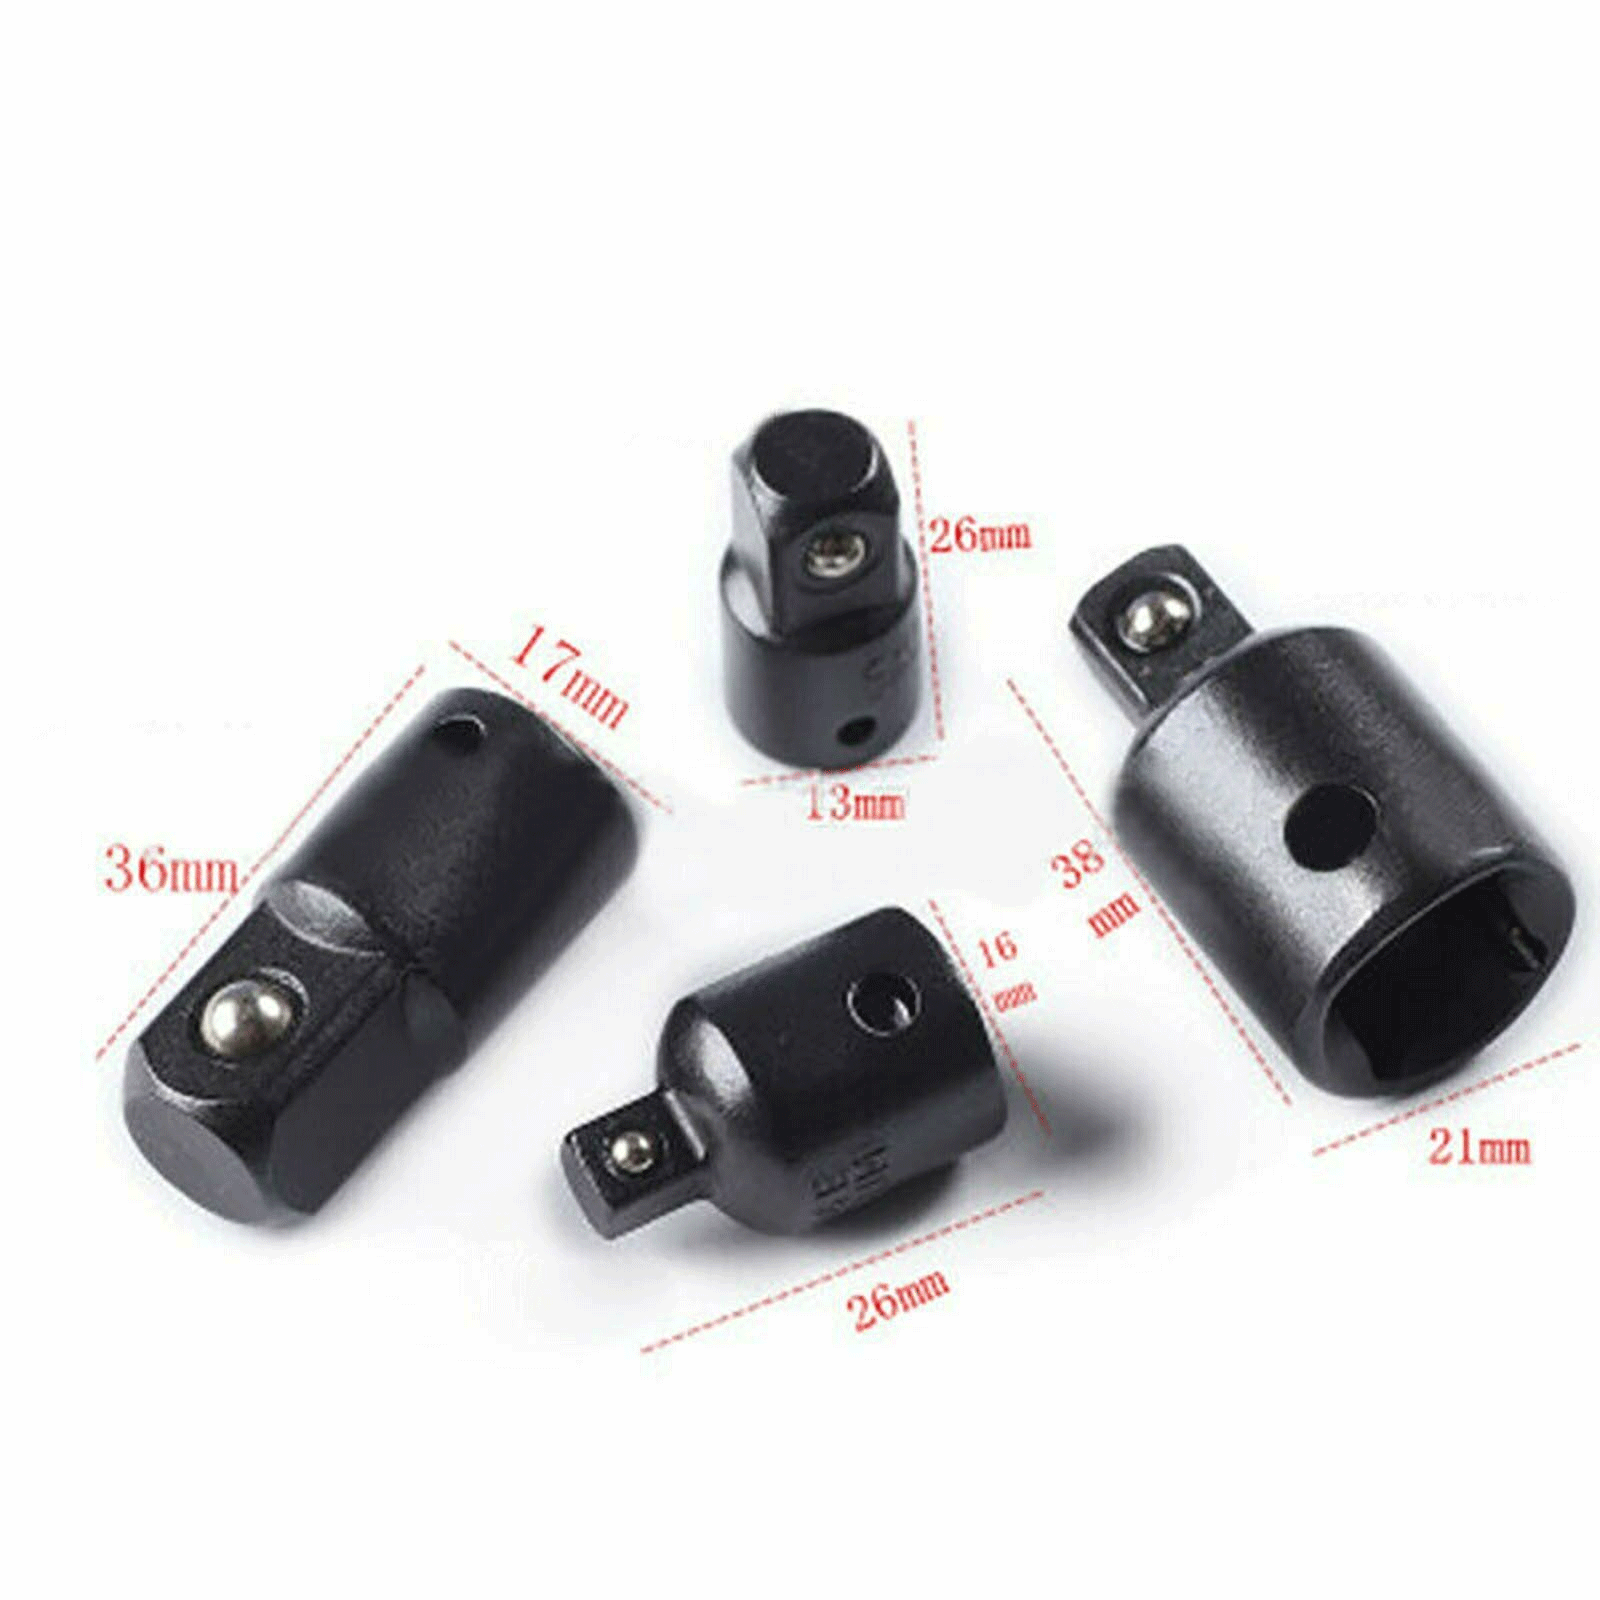 4-pack 3/8" to 1/4" 1/2 inch Drive Ratchet SOCKET ADAPTER REDUCER Air Impact Set Geartronics Does Not Apply - фотография #13